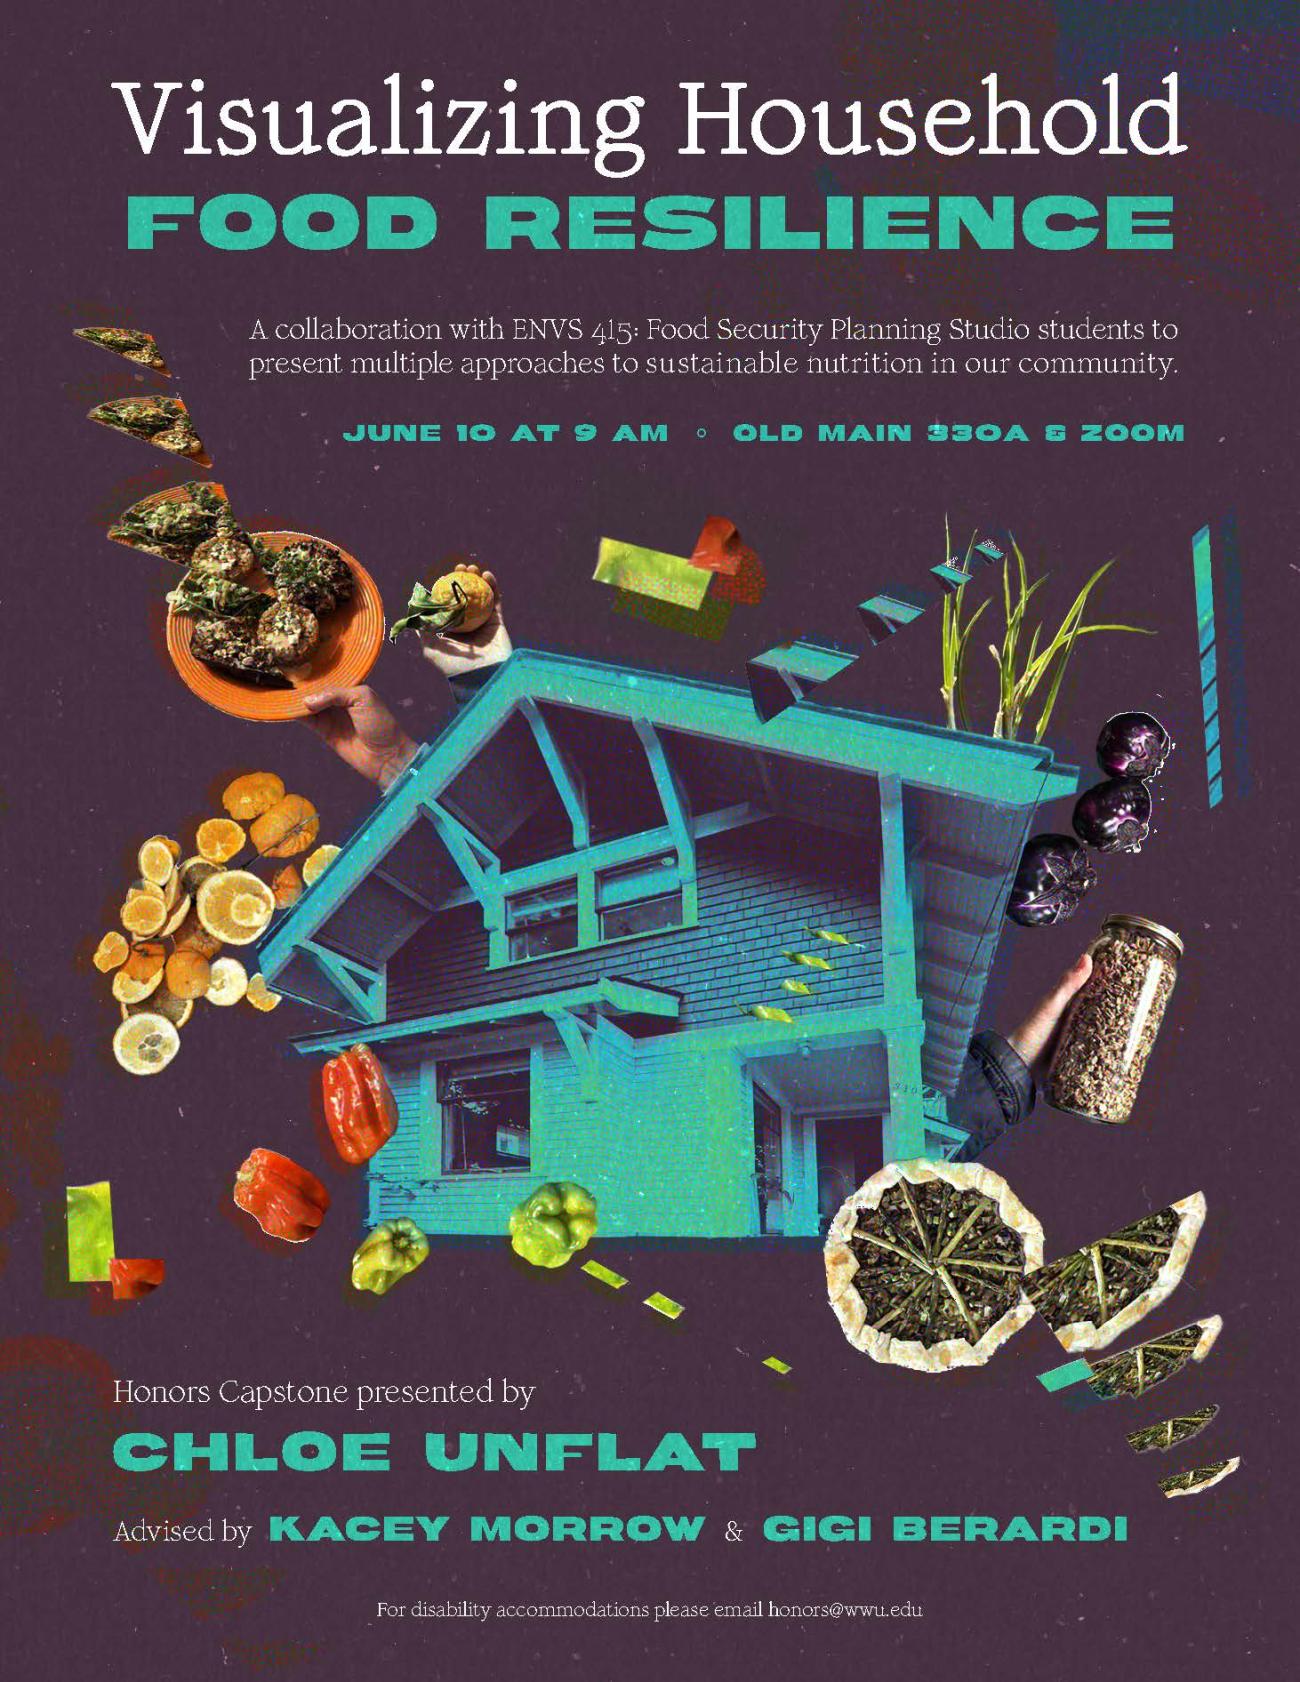 A dark purple poster with a half-tone textured collage of a house surrounded by fragmented food and hands. The text reads "Visualizing Household Food Resilience: A collaboration with ENVS 415: Food Security Planning Studio students to present multiple approaches to sustainable nutrition in our community. Capstone Presentation by Chloe Unflat. Advised by Kacey Morrow and Gigi Berardi. June 10th at 9:00 AM. Old Main 330A and Zoom. For disability accommodations, please email honors@wwu.edu